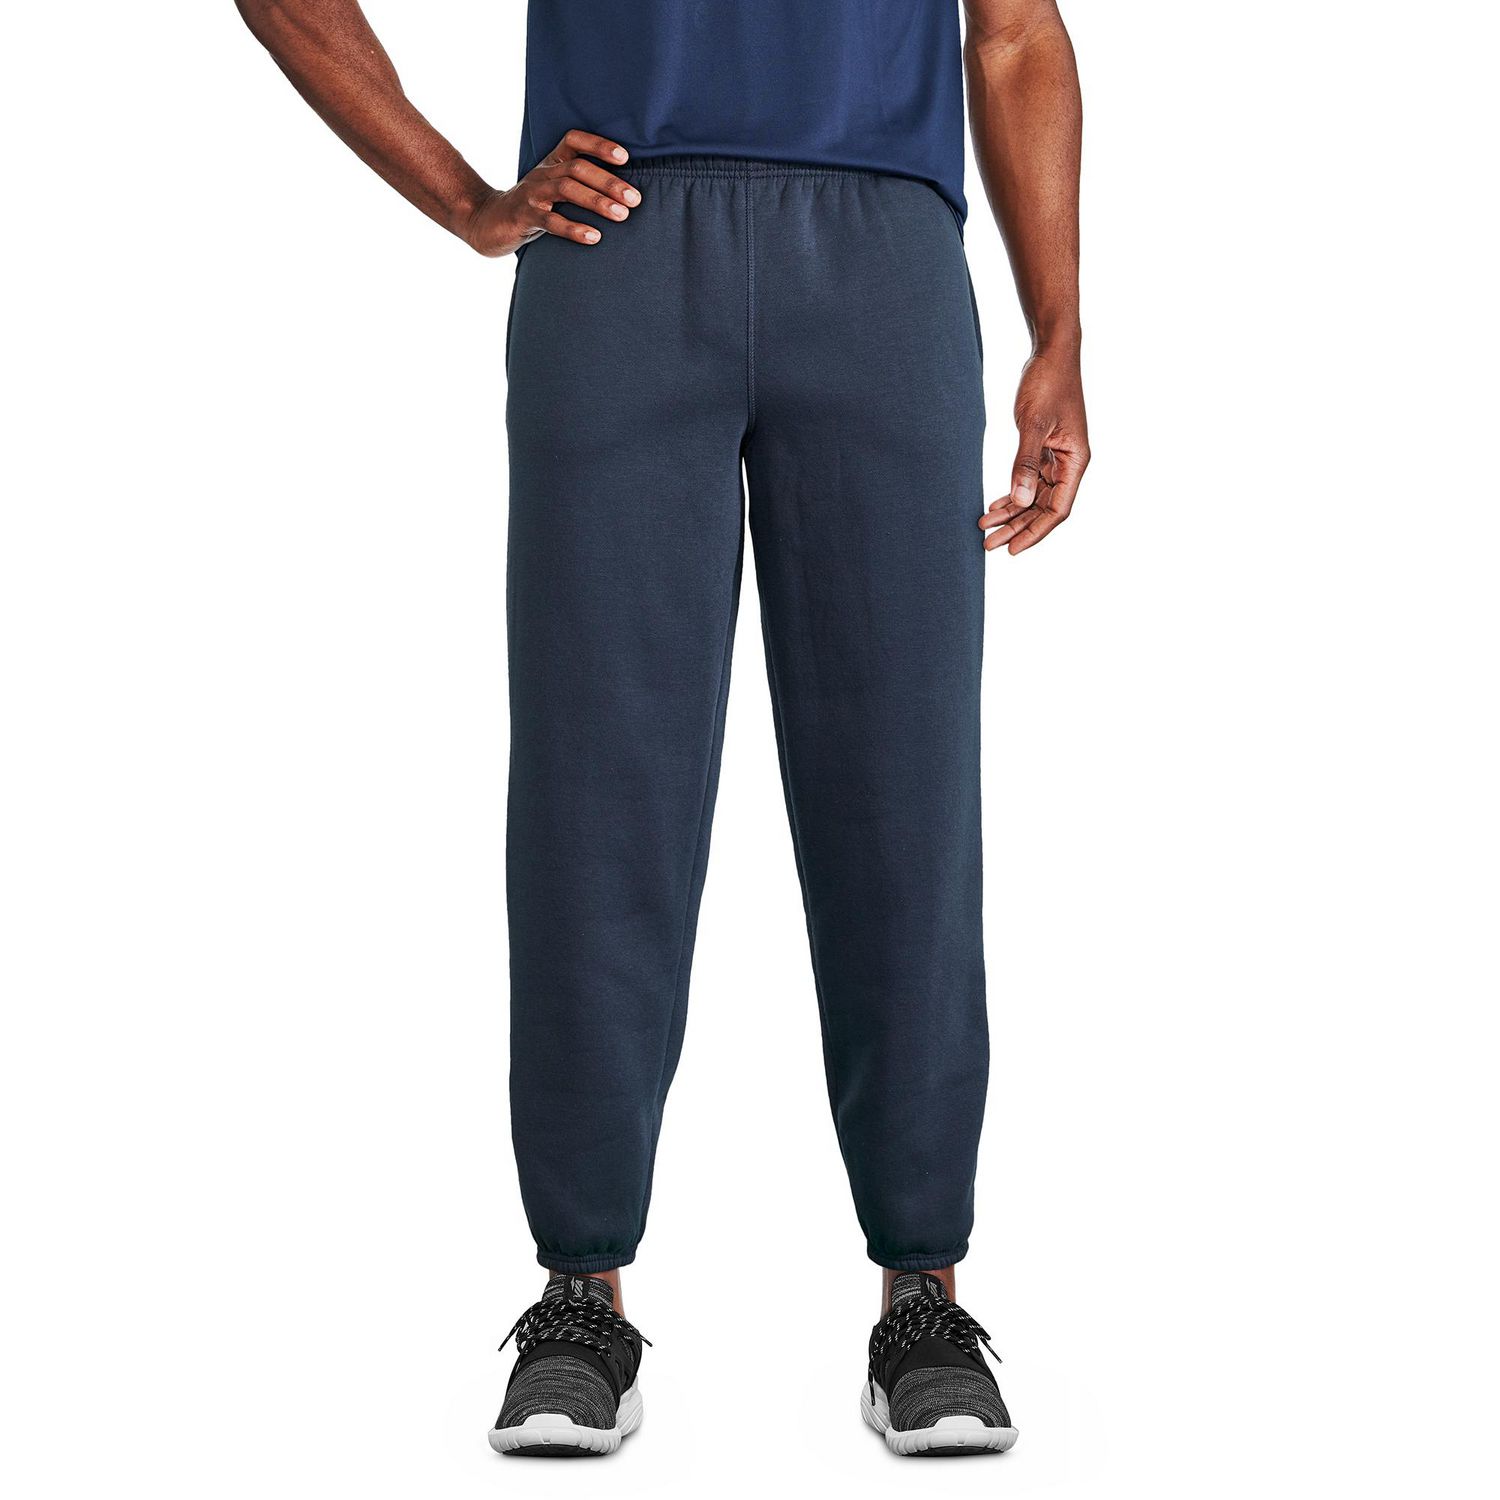 THE GYM PEOPLE Men's Fleece Joggers Pants with Deep Pockets